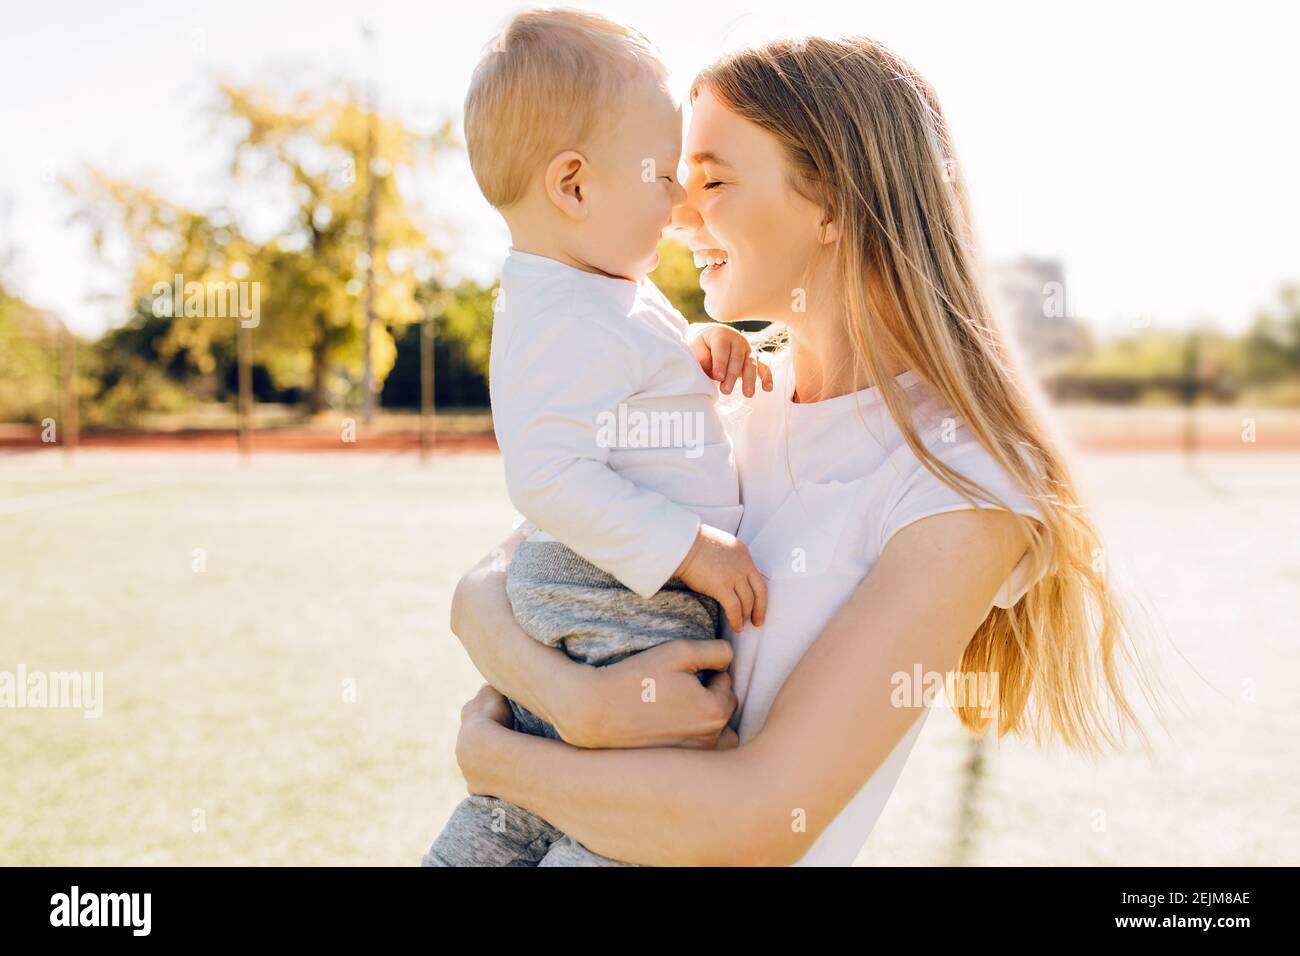 Caring young mother with baby, loving mom kissing hugs little child enjoying tender family moment outdoors on a sunny day, Mother's Day Stock Photo